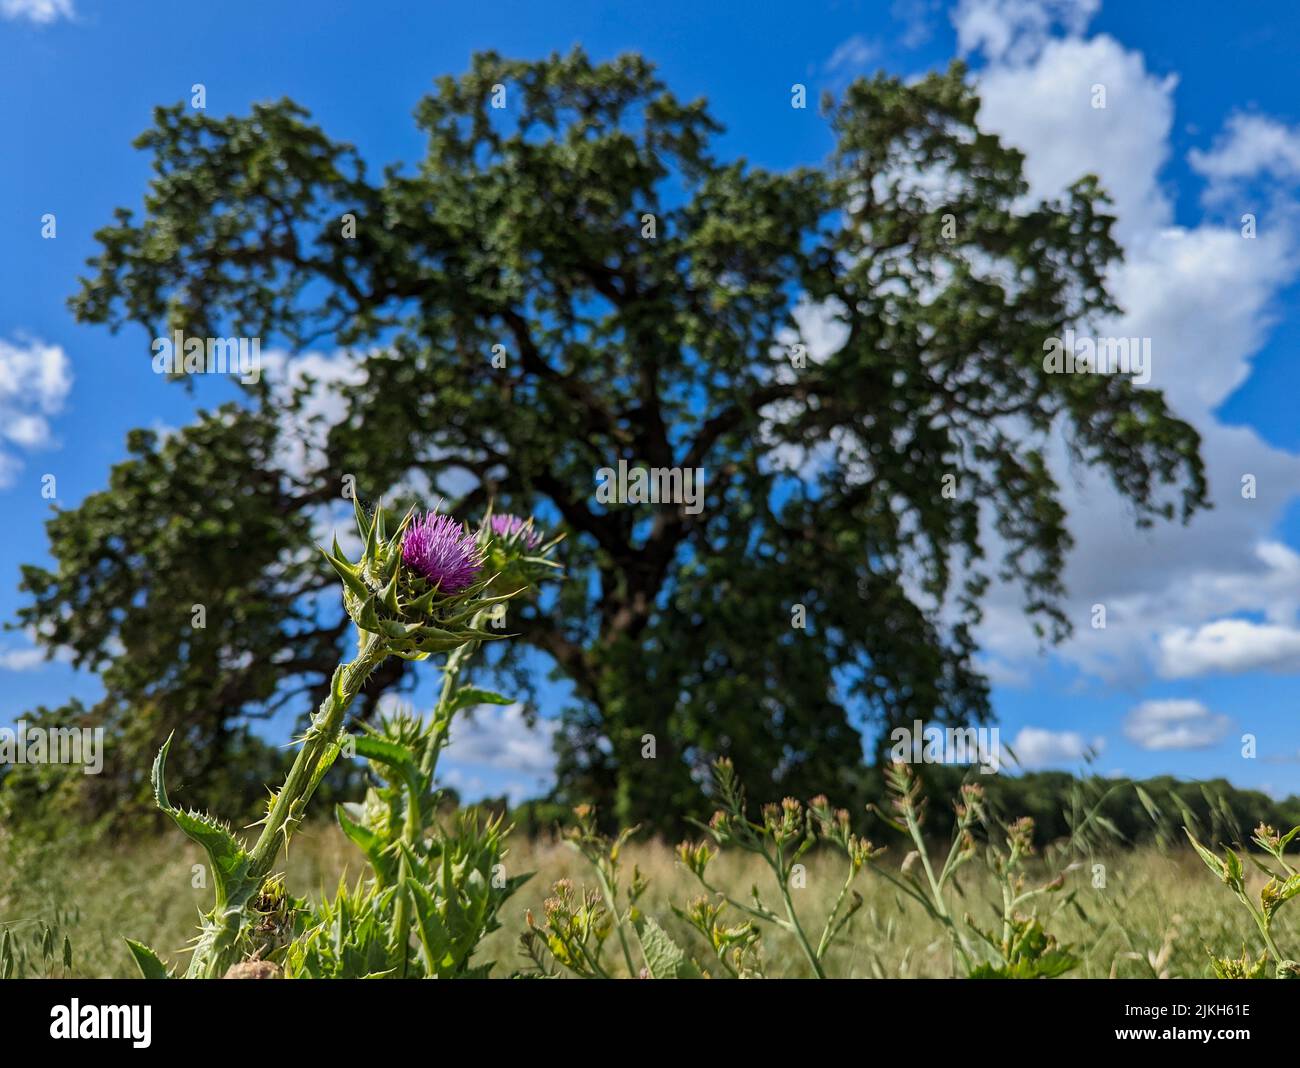 A scenic view of two welted thistle flowers in a rural area in a blurred tree background Stock Photo